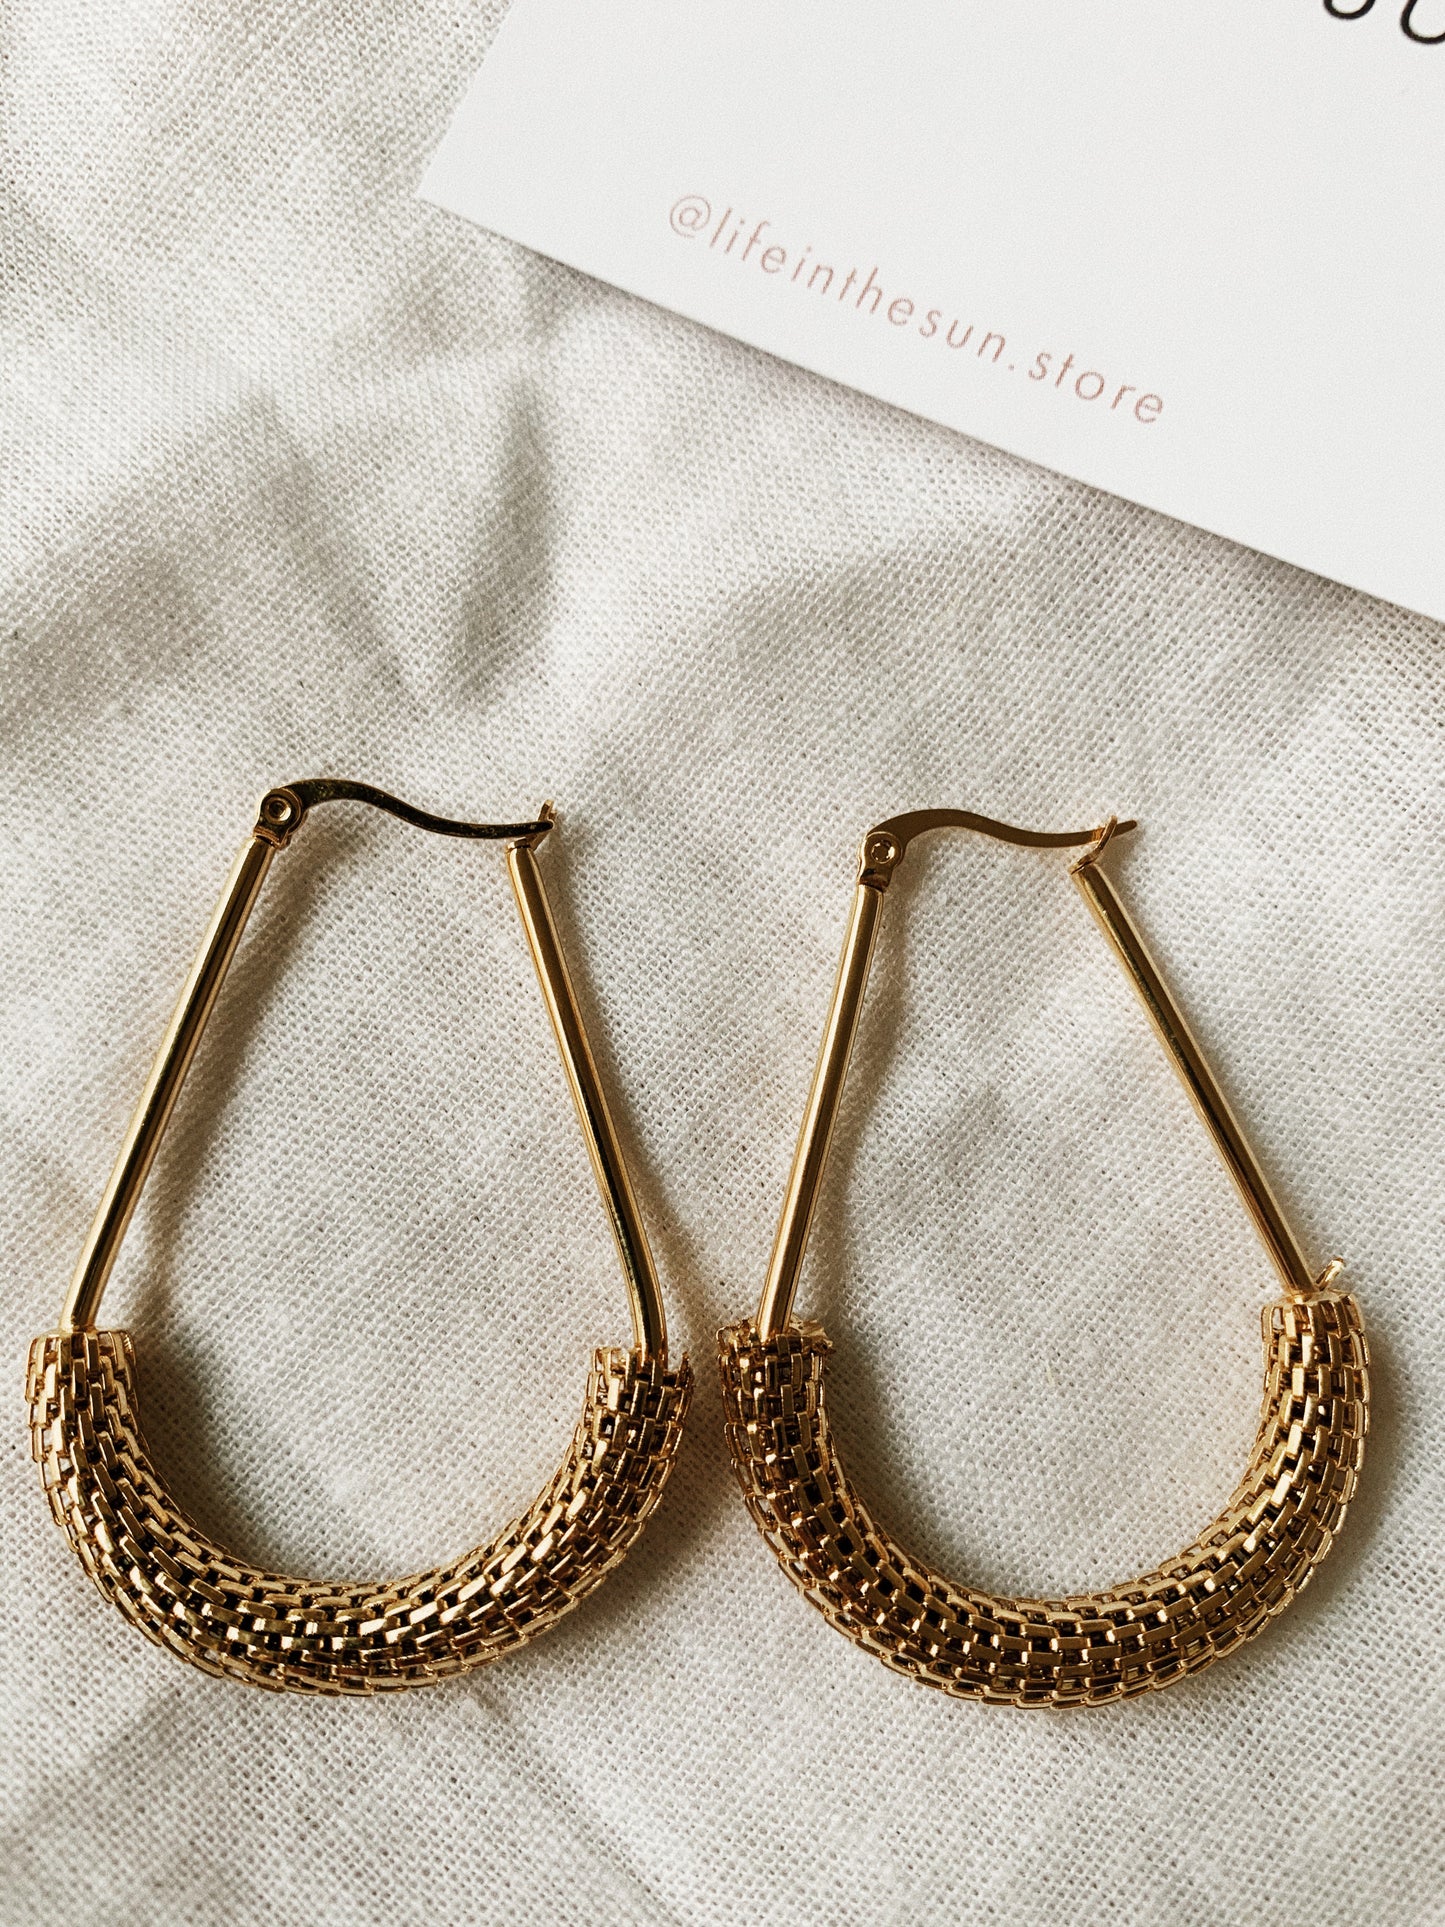 Gold hardware Mesh Uber Hoops | By: Life in the sun store